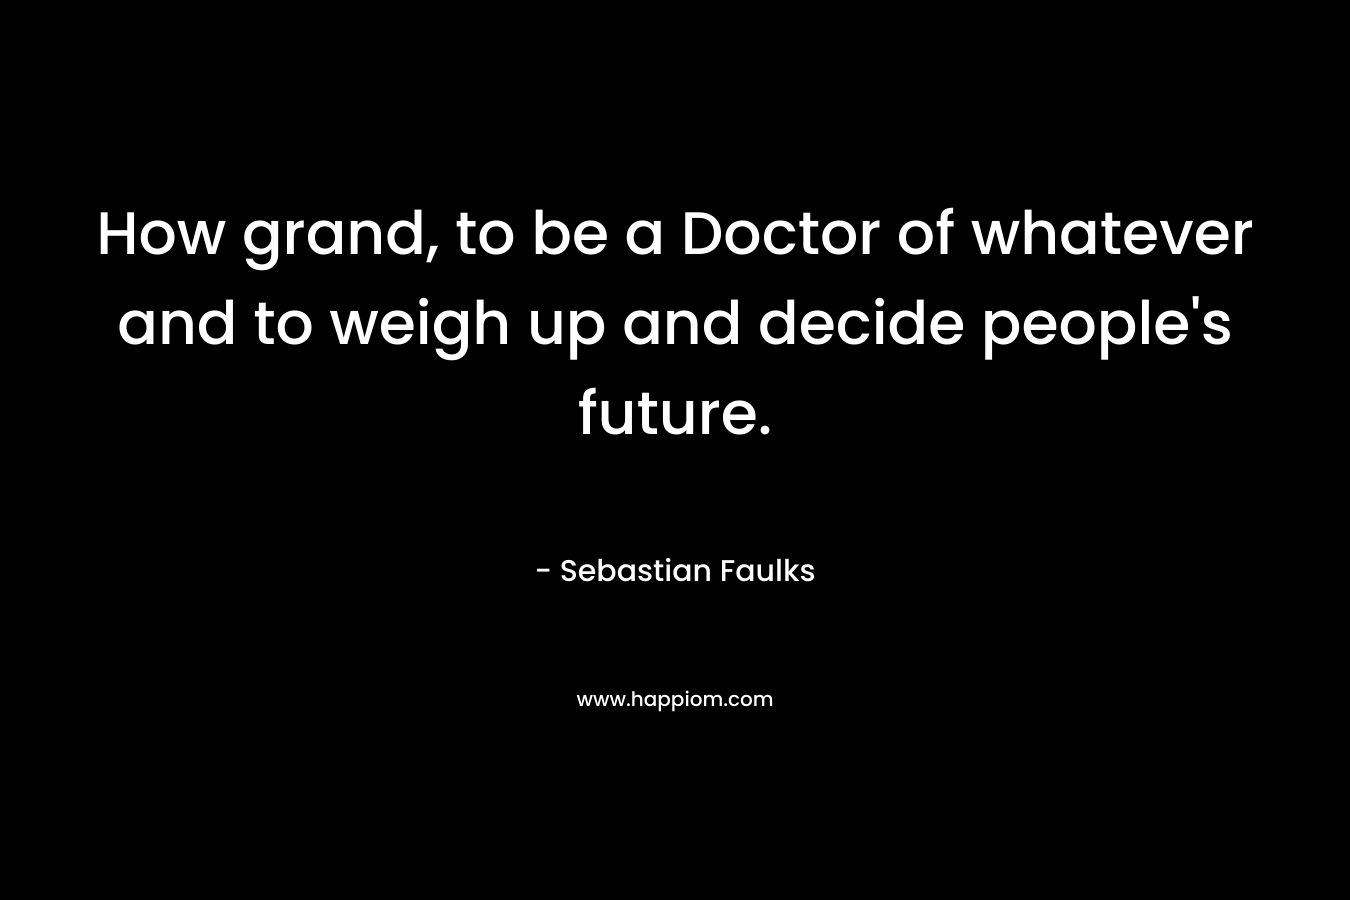 How grand, to be a Doctor of whatever and to weigh up and decide people's future.